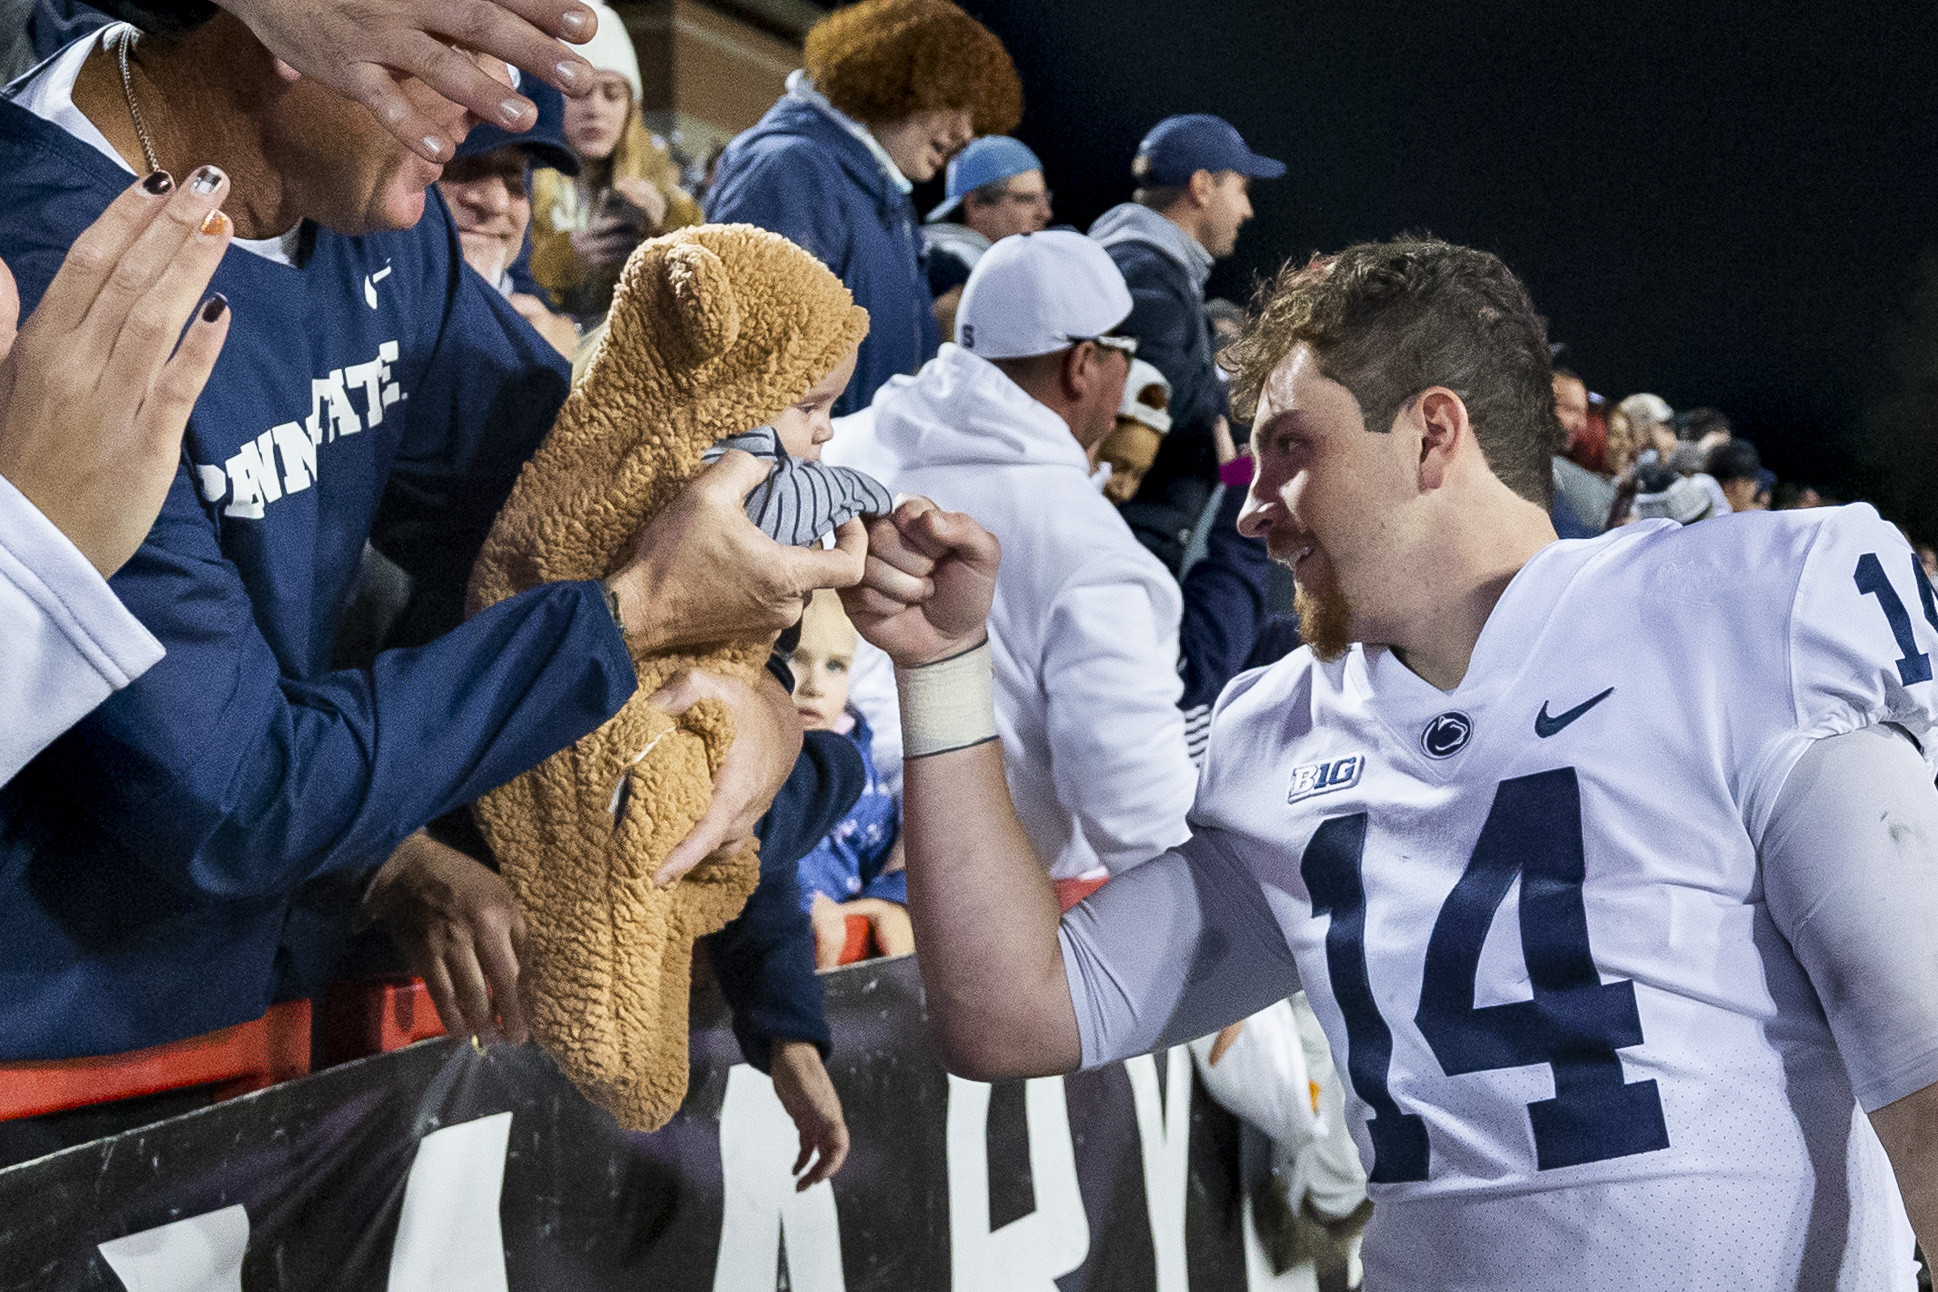 Penn State quarterback Sean Clifford celebrates with fans after the 31-14 win over Maryland on Nov. 6, 2021. Joe Hermitt | jhermitt@pennlive.com